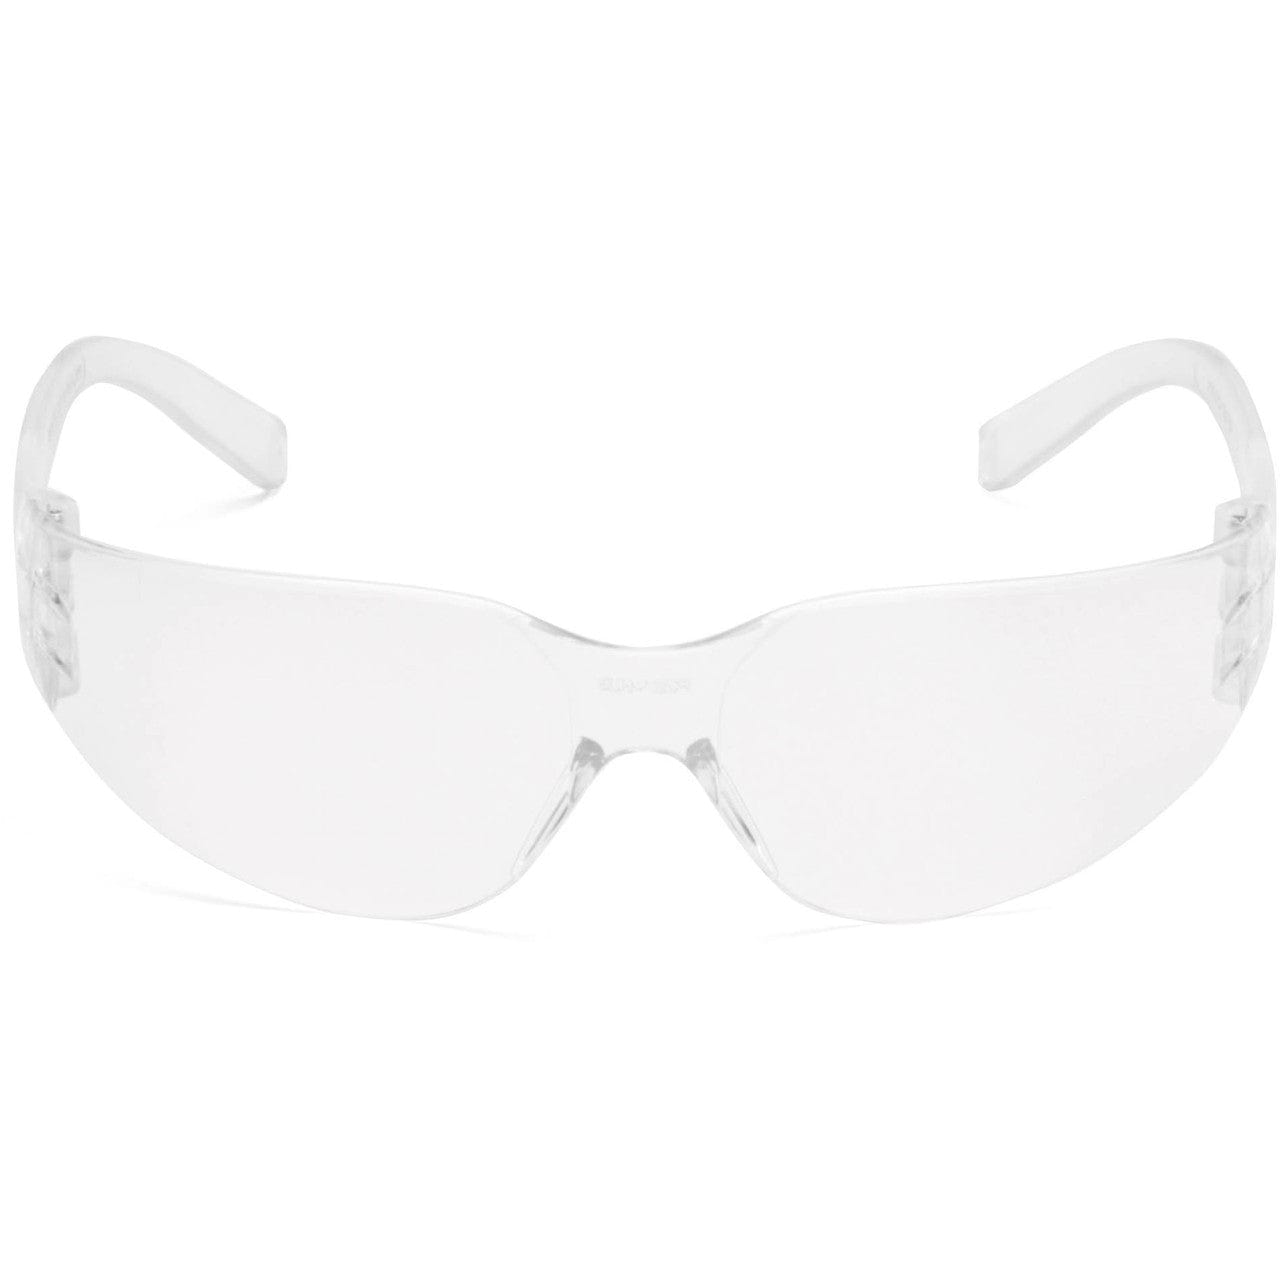 Pyramex S4110ST Intruder Safety Glasses Front View